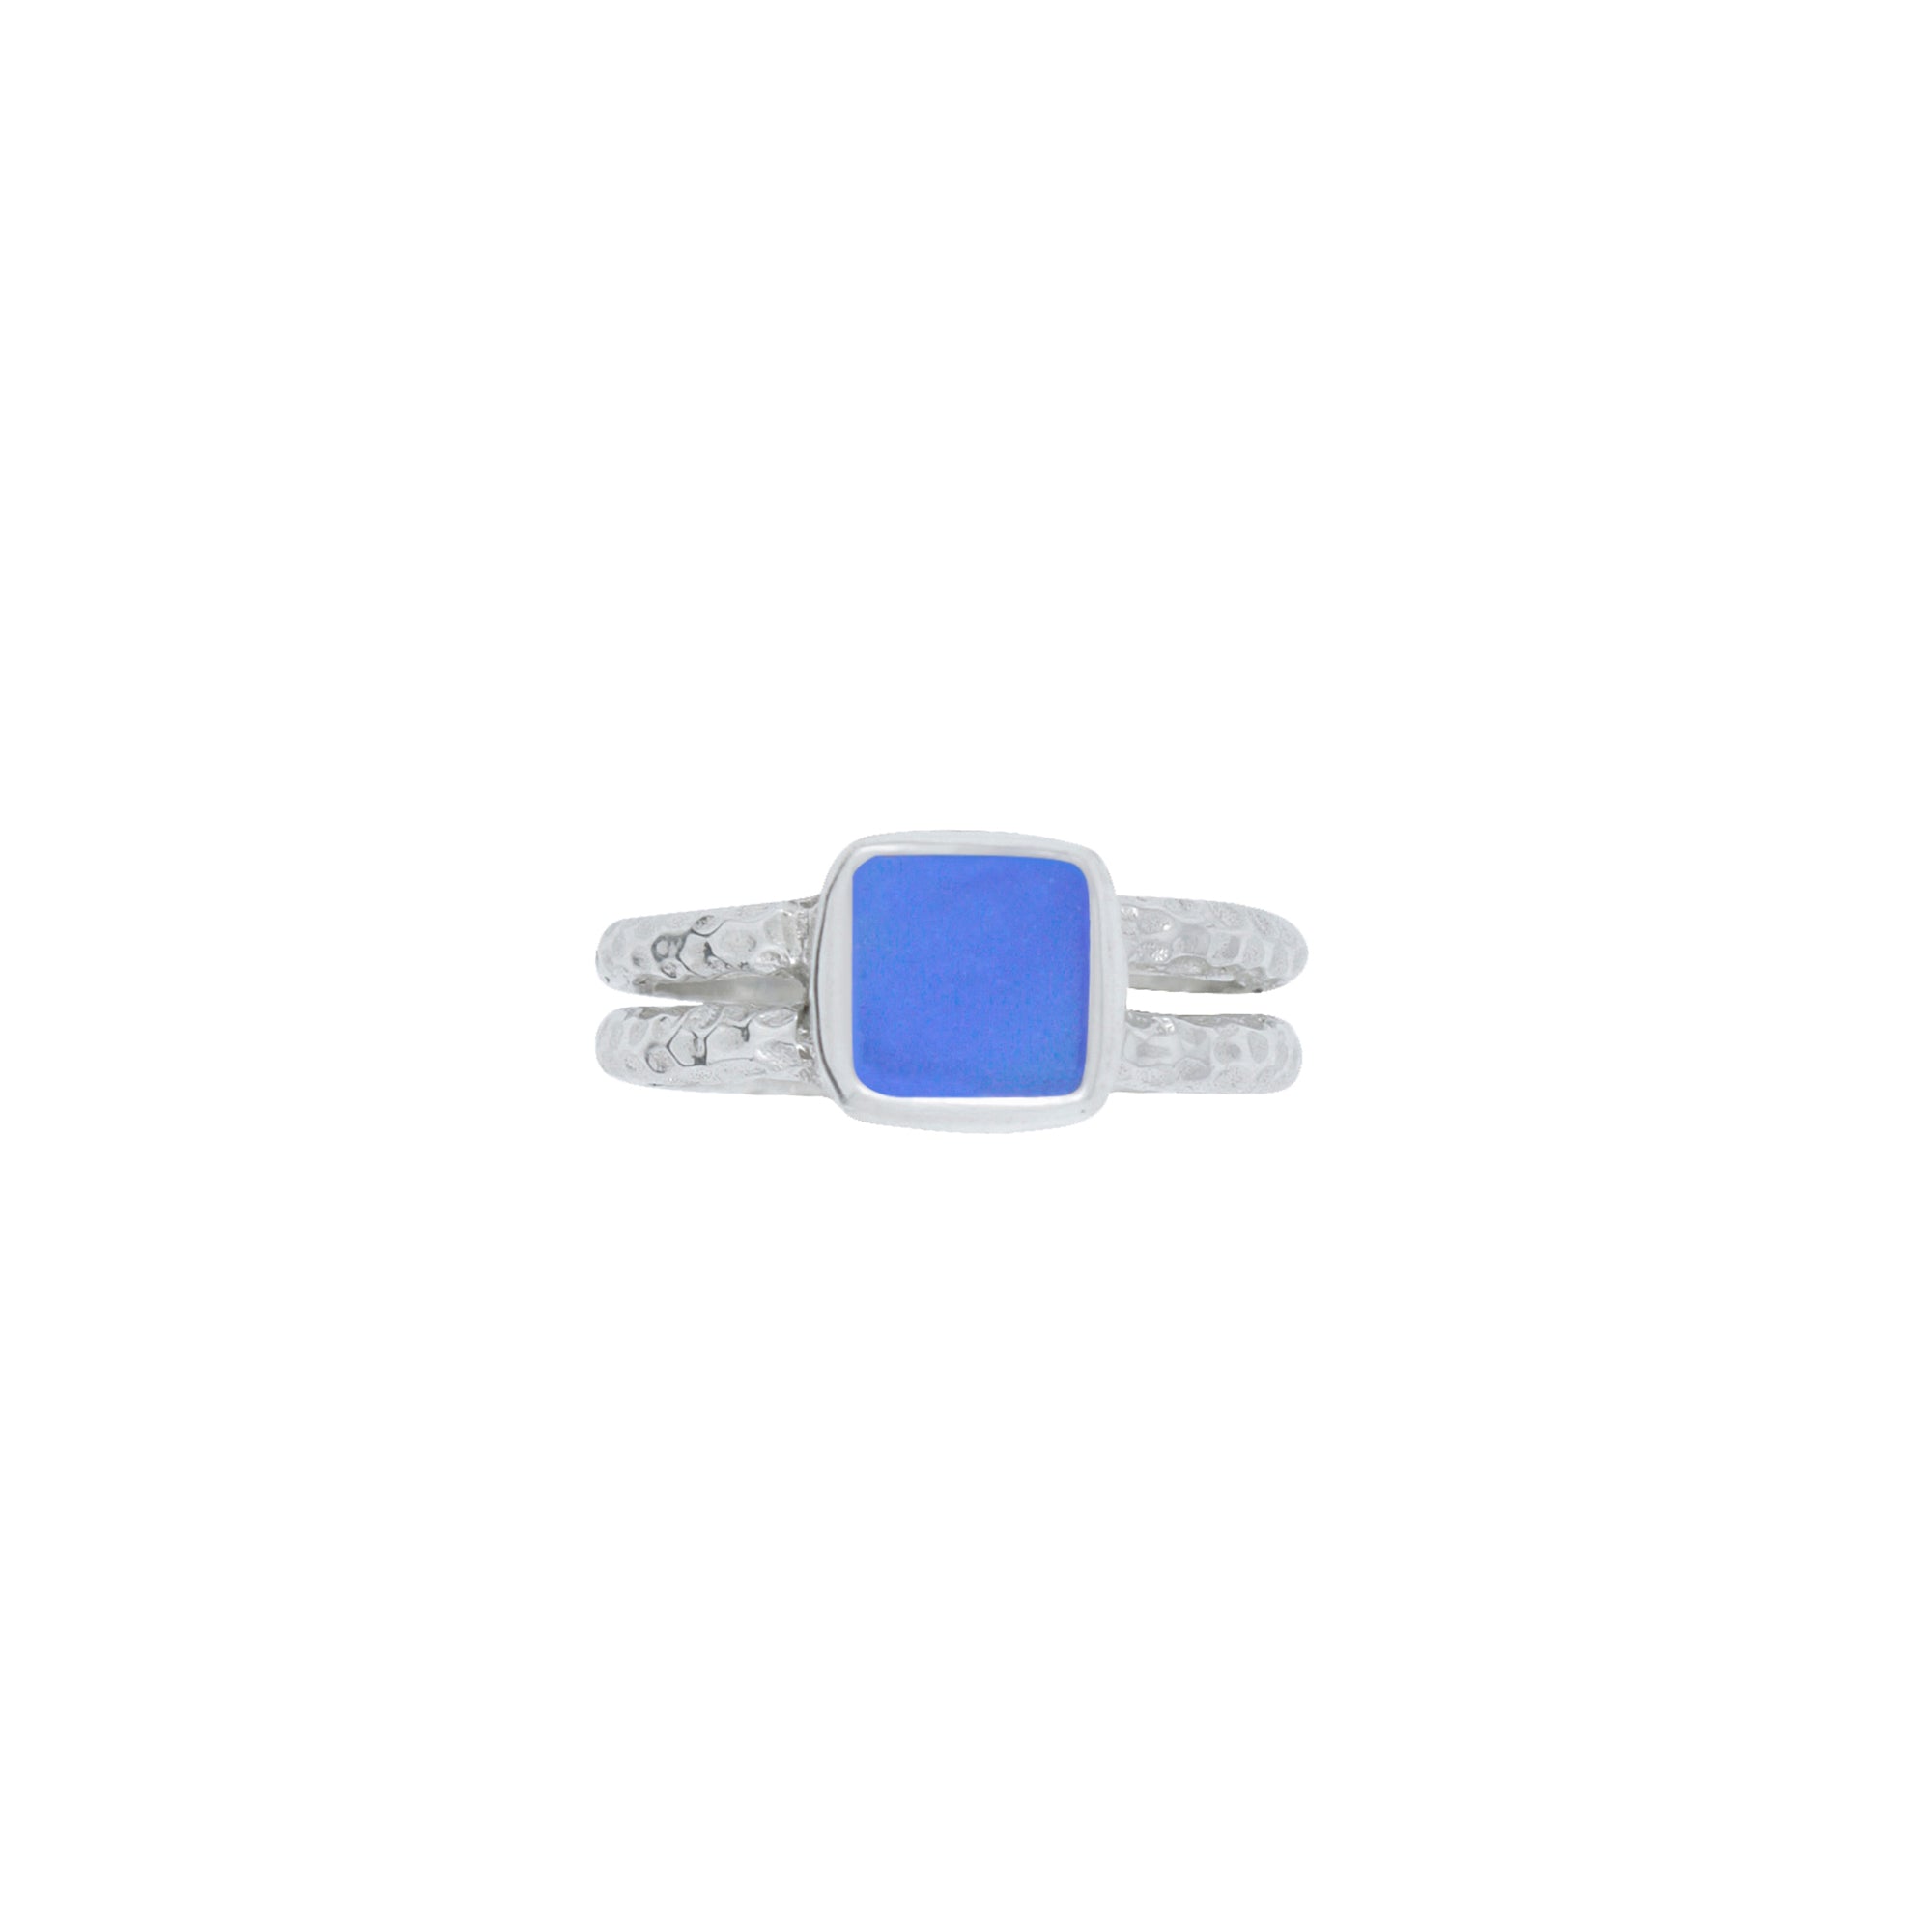 Cobalt Blue Sea Glass Ring with hammered Silver texture